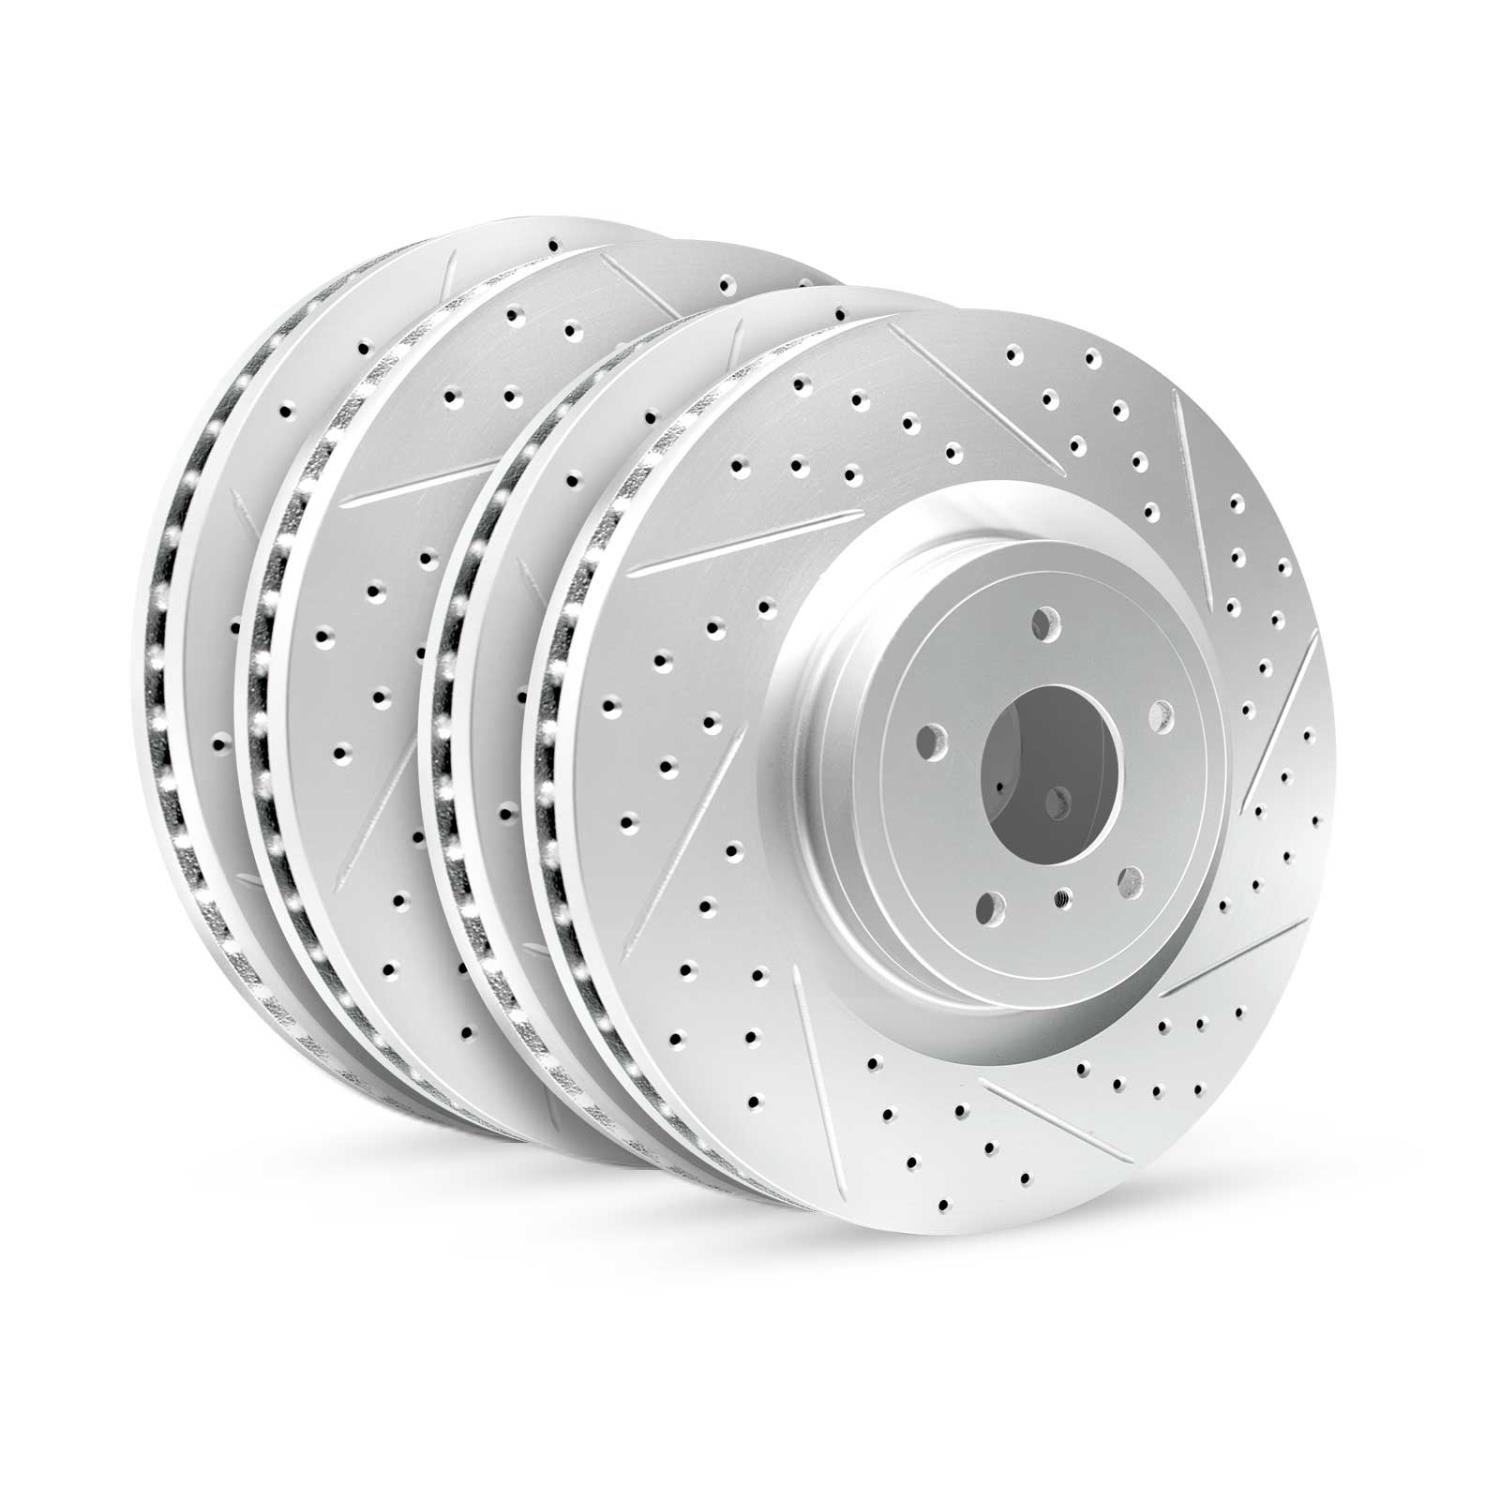 GEO-Carbon Drilled/Slotted Rotors, 2011-2019 Ford/Mazda,